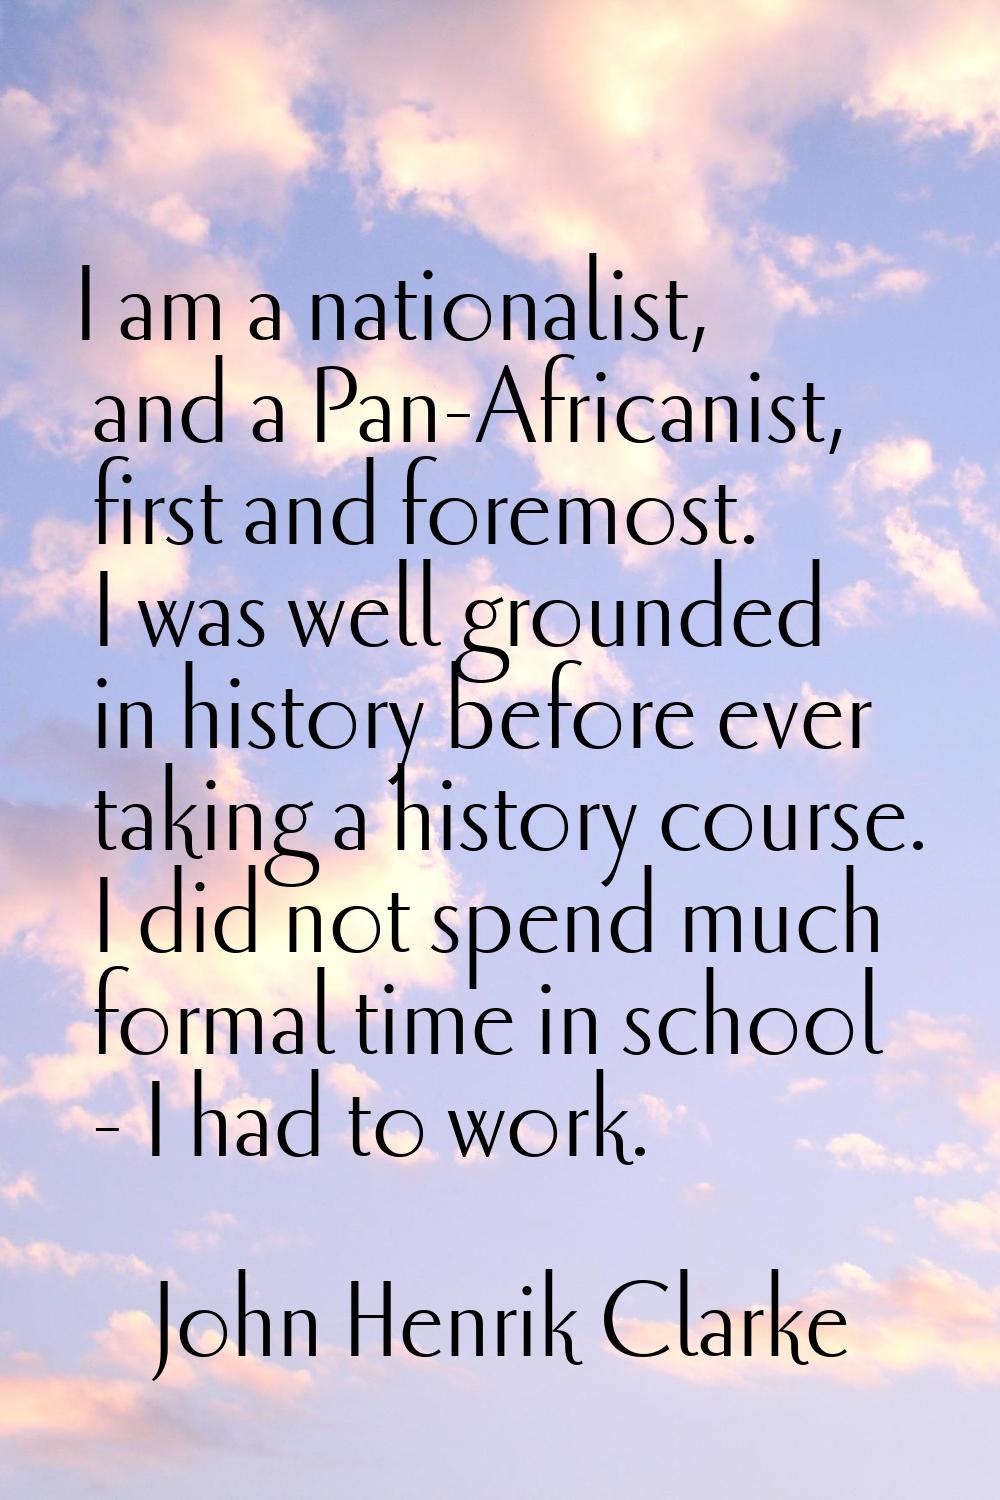 I am a nationalist, and a Pan-Africanist, first and foremost. I was well grounded in history before